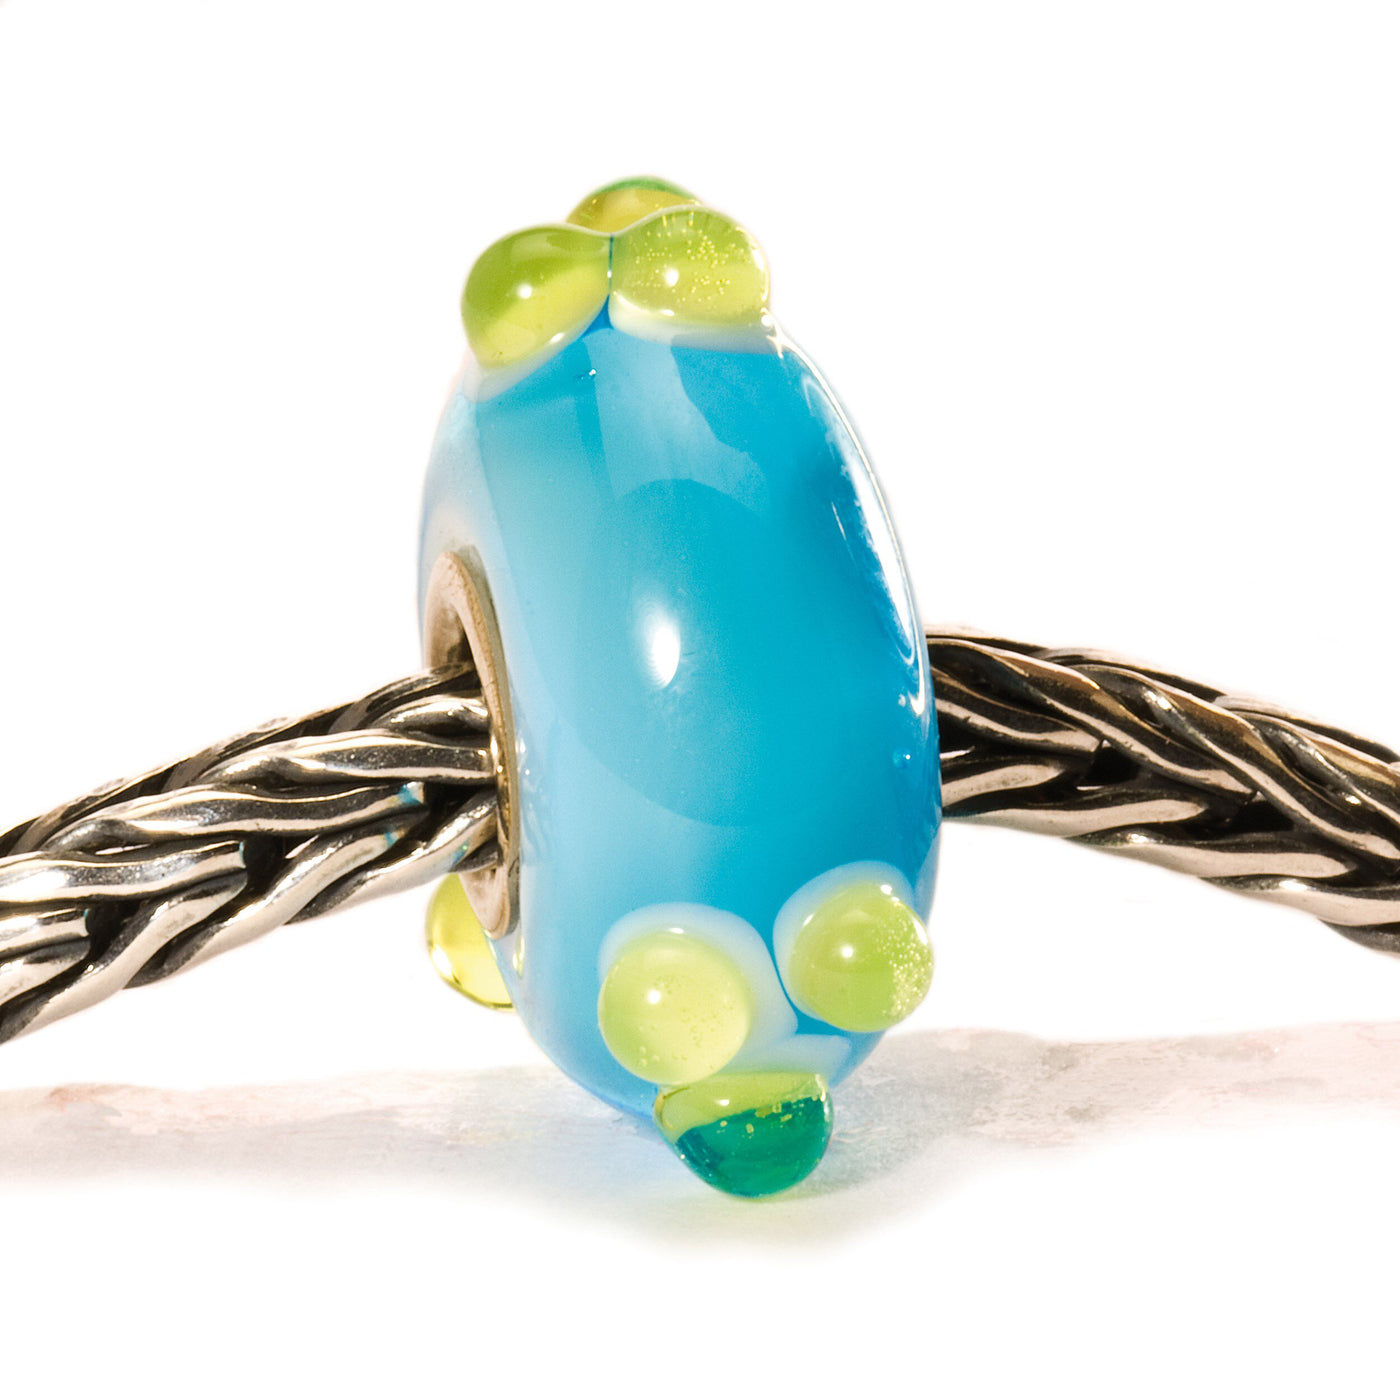 Turquoise/Green Spring Bud - Trollbeads Canada